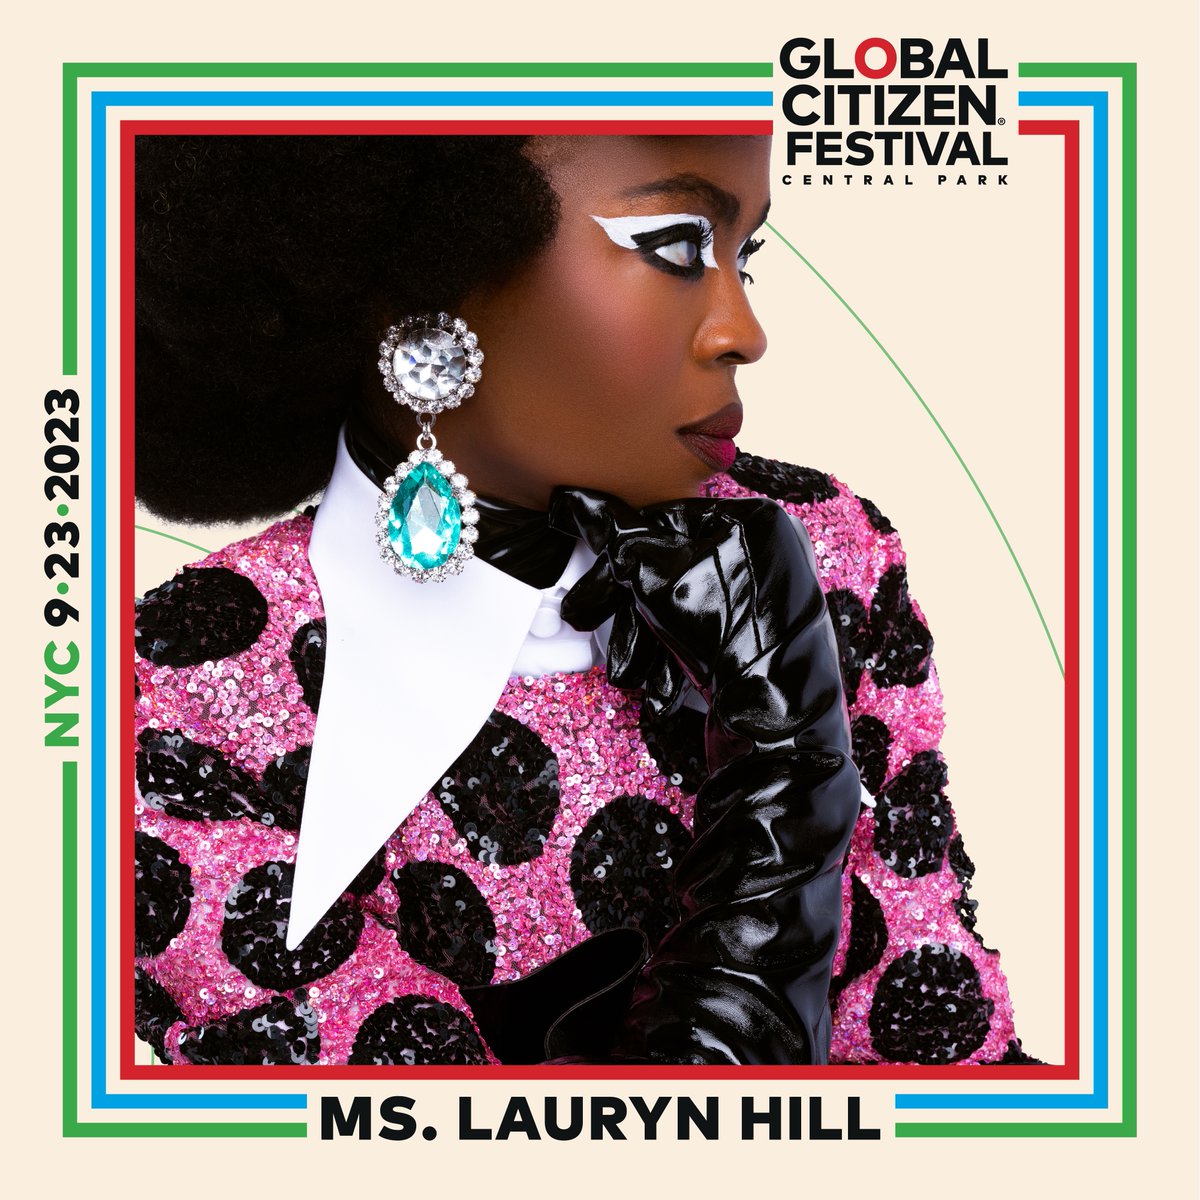 I’ll be celebrating the 25th Anniversary of the Miseducation of Lauryn Hill with @GlblCtzn in @CentralParkNYC on September 23rd for #GlobalCitizenFestival! Take action now to earn tickets to the show! glblctzn.co/mslaurynhill #EndExtremePoverty